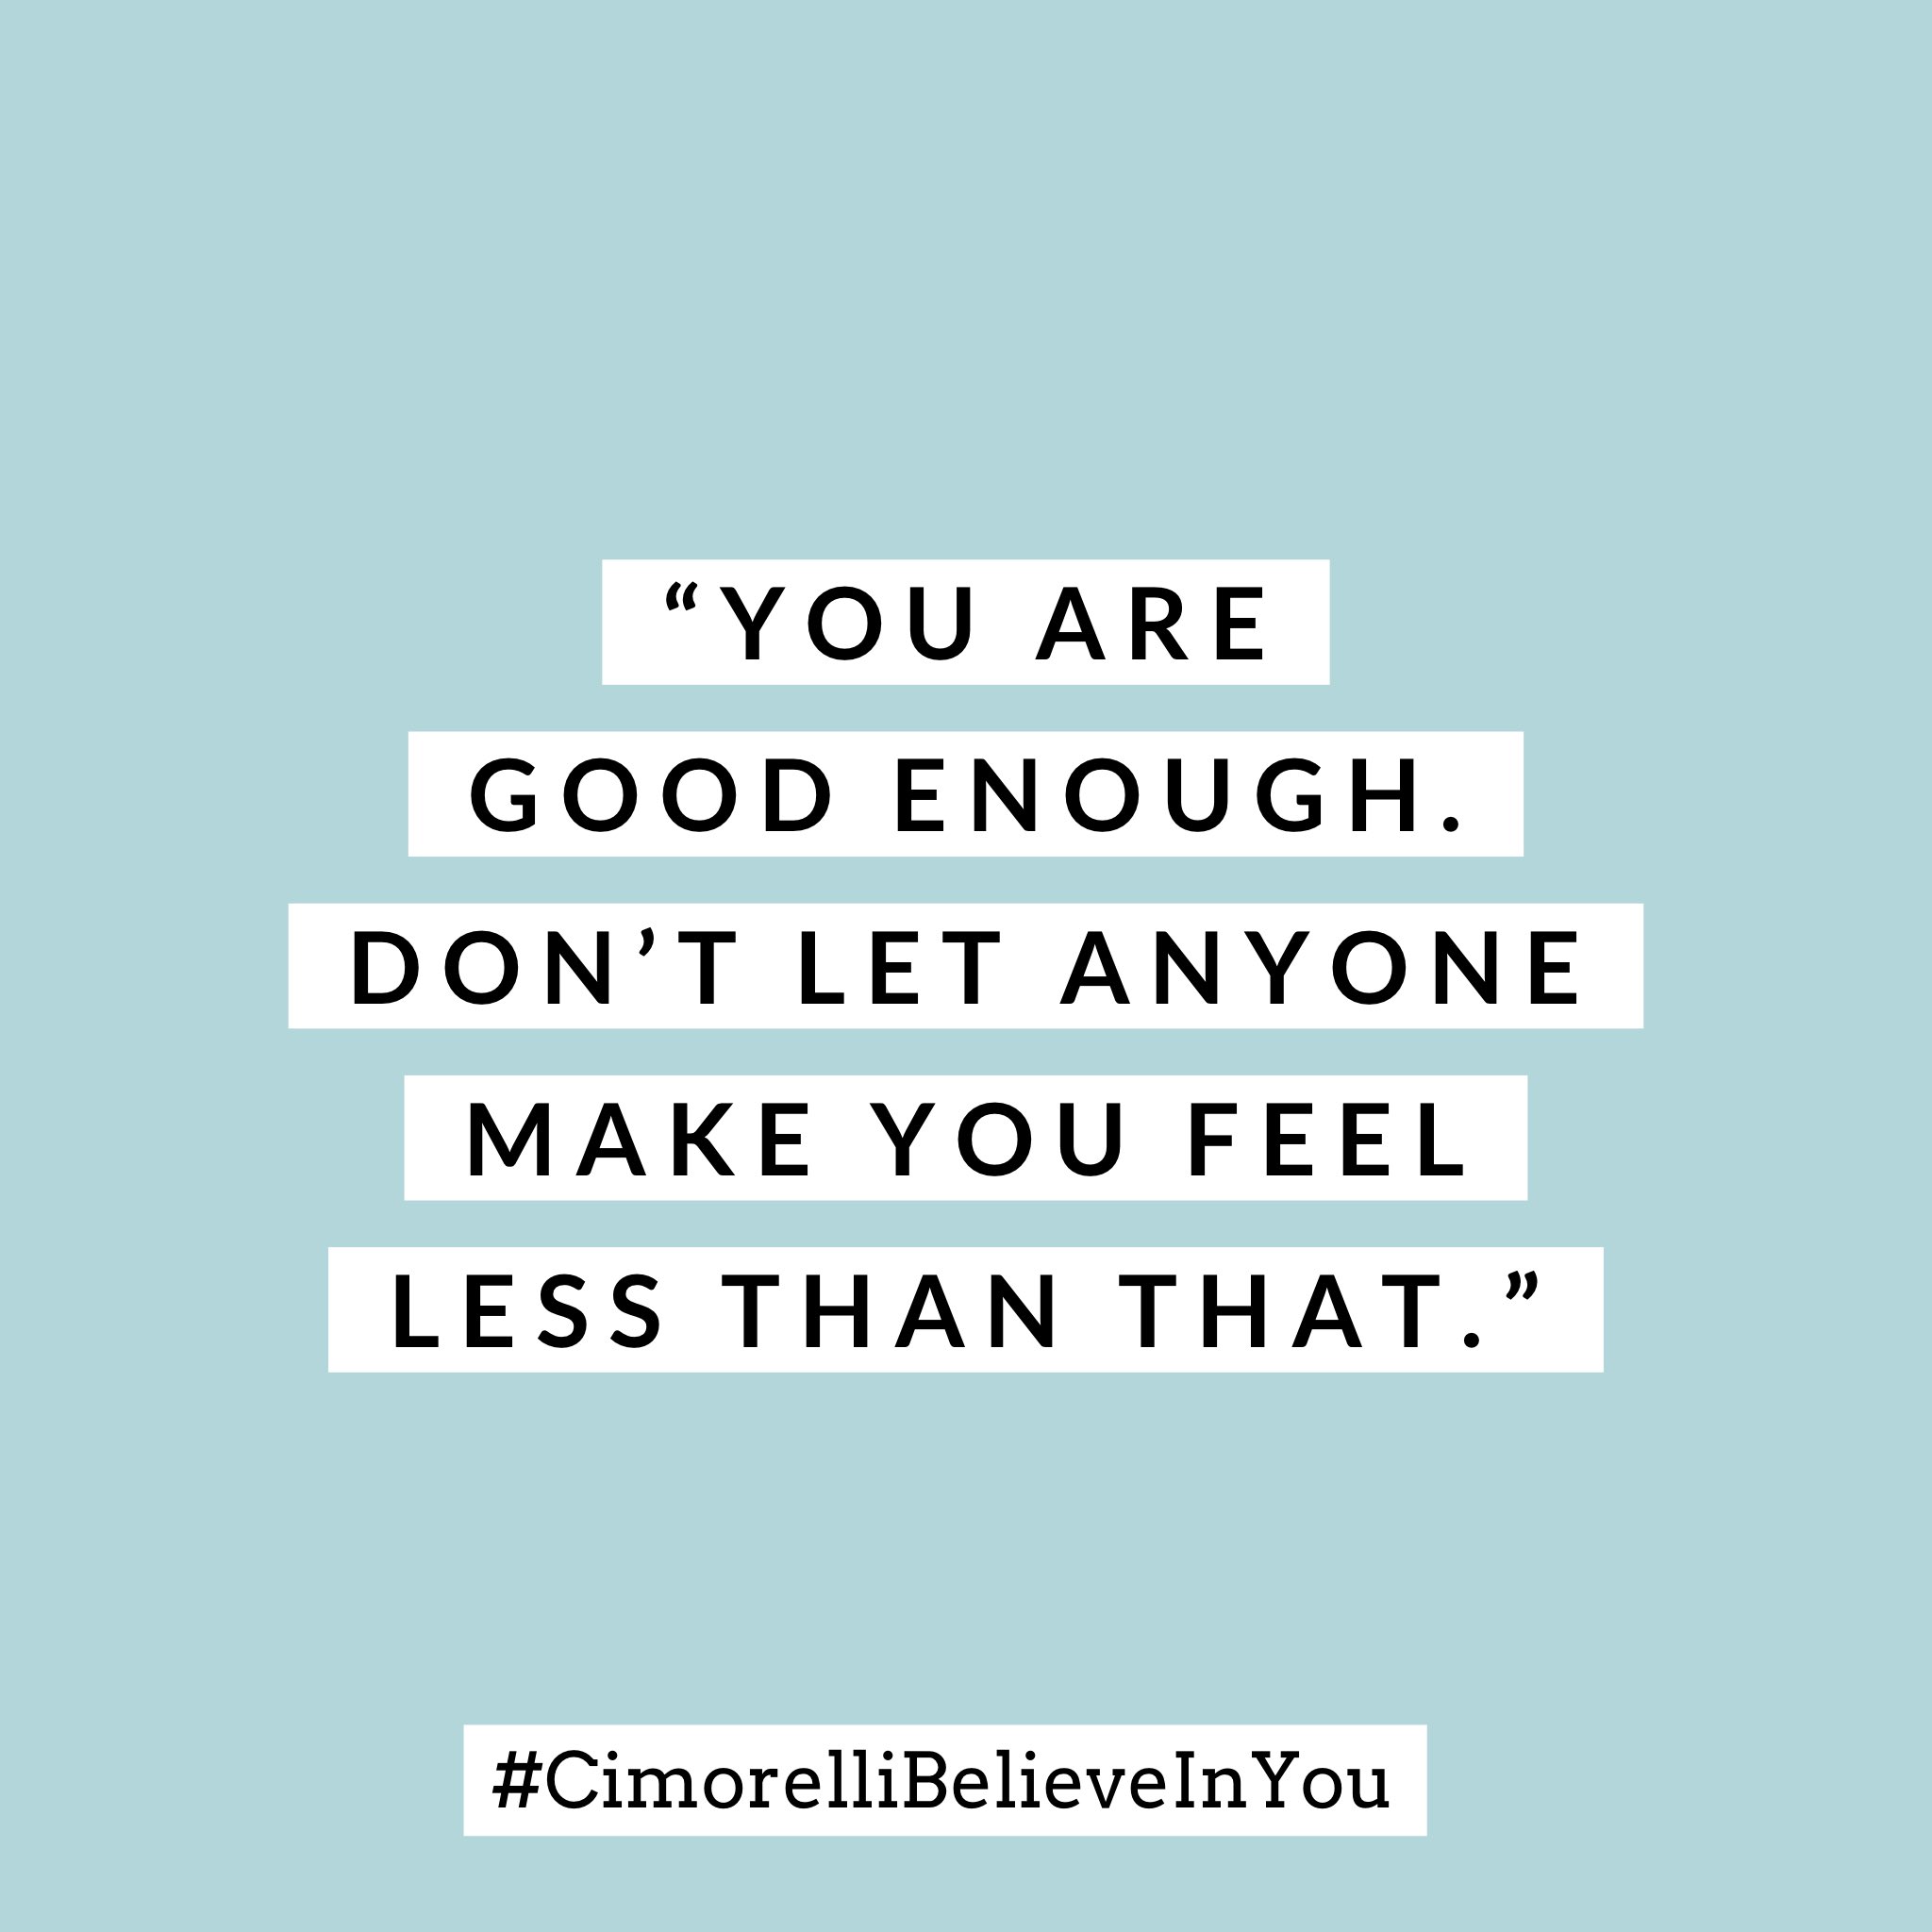 Cimorelli Motivationalmonday You Are Good Enough You Are Smart Enough You Are Strong Enough Never Let Anyone Make You Feel Any Less Than That T Co Ys6g0pkhpo Twitter